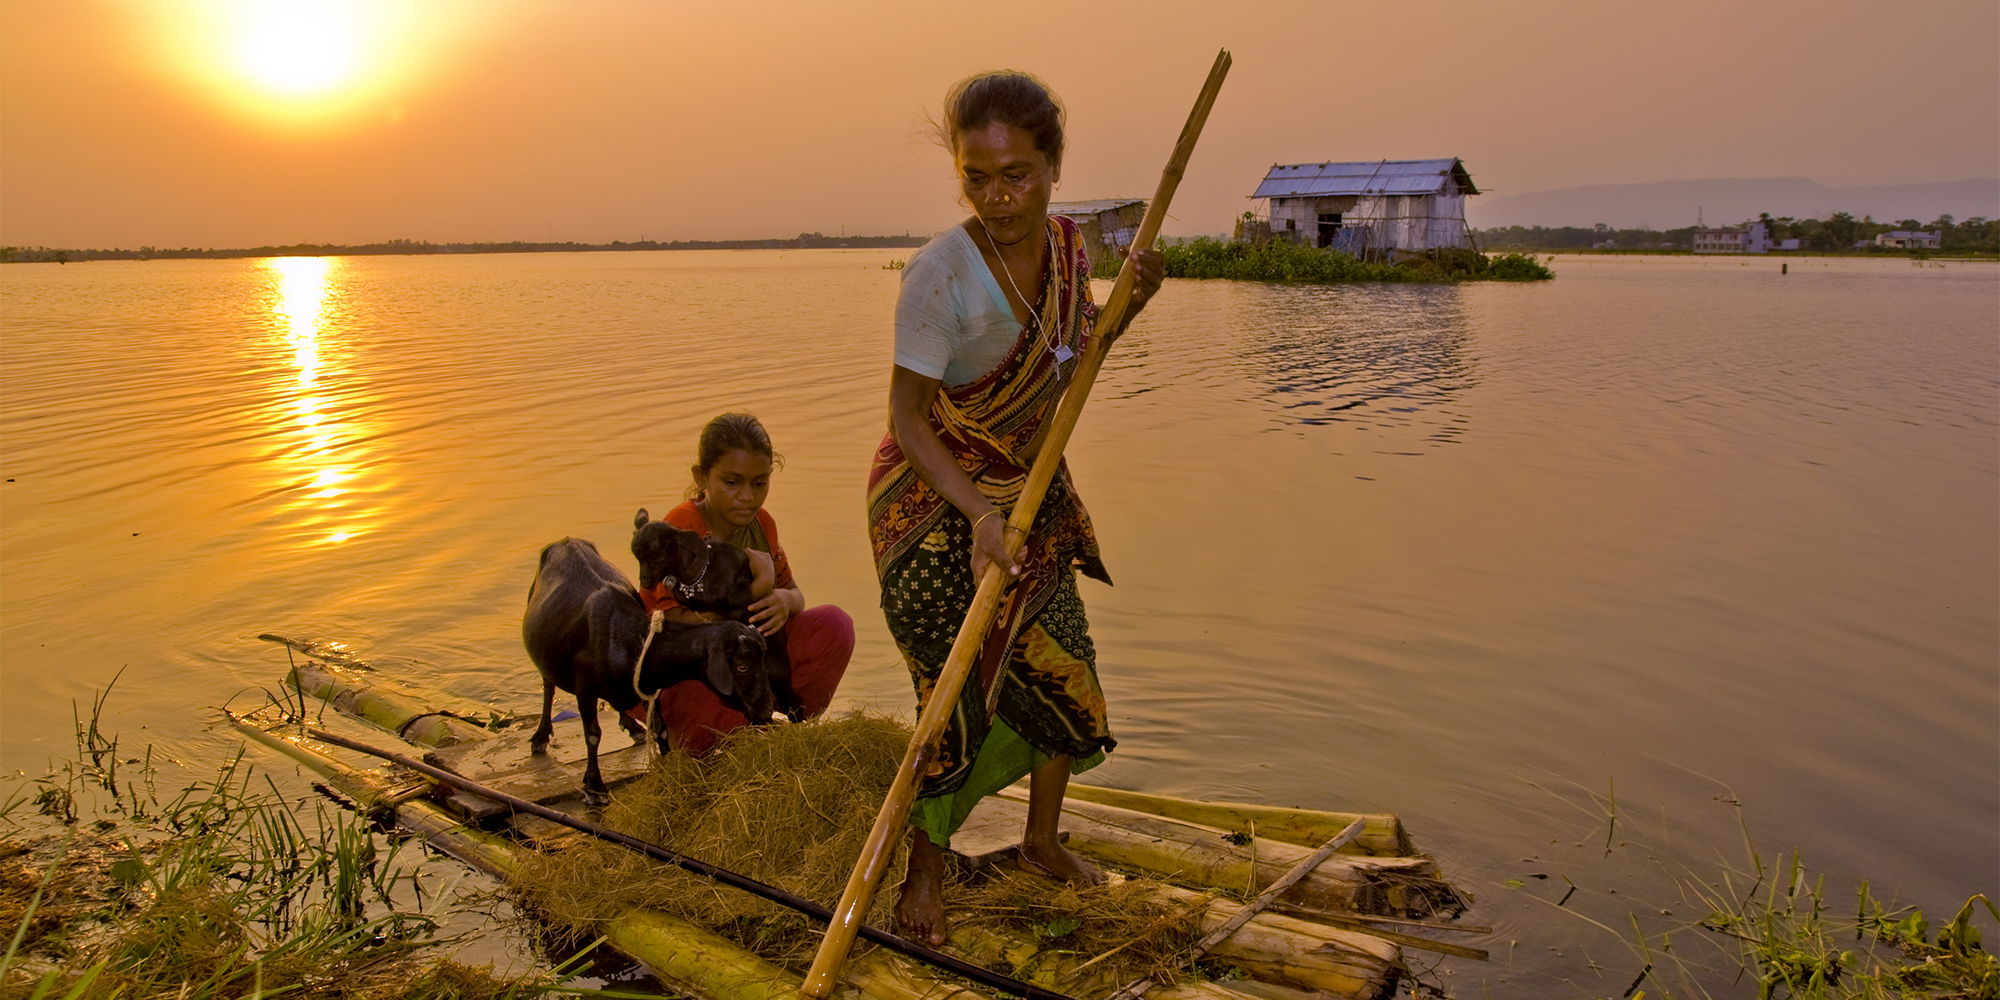 A Bangladeshi woman pushes a raft on which a child and two goats are riding